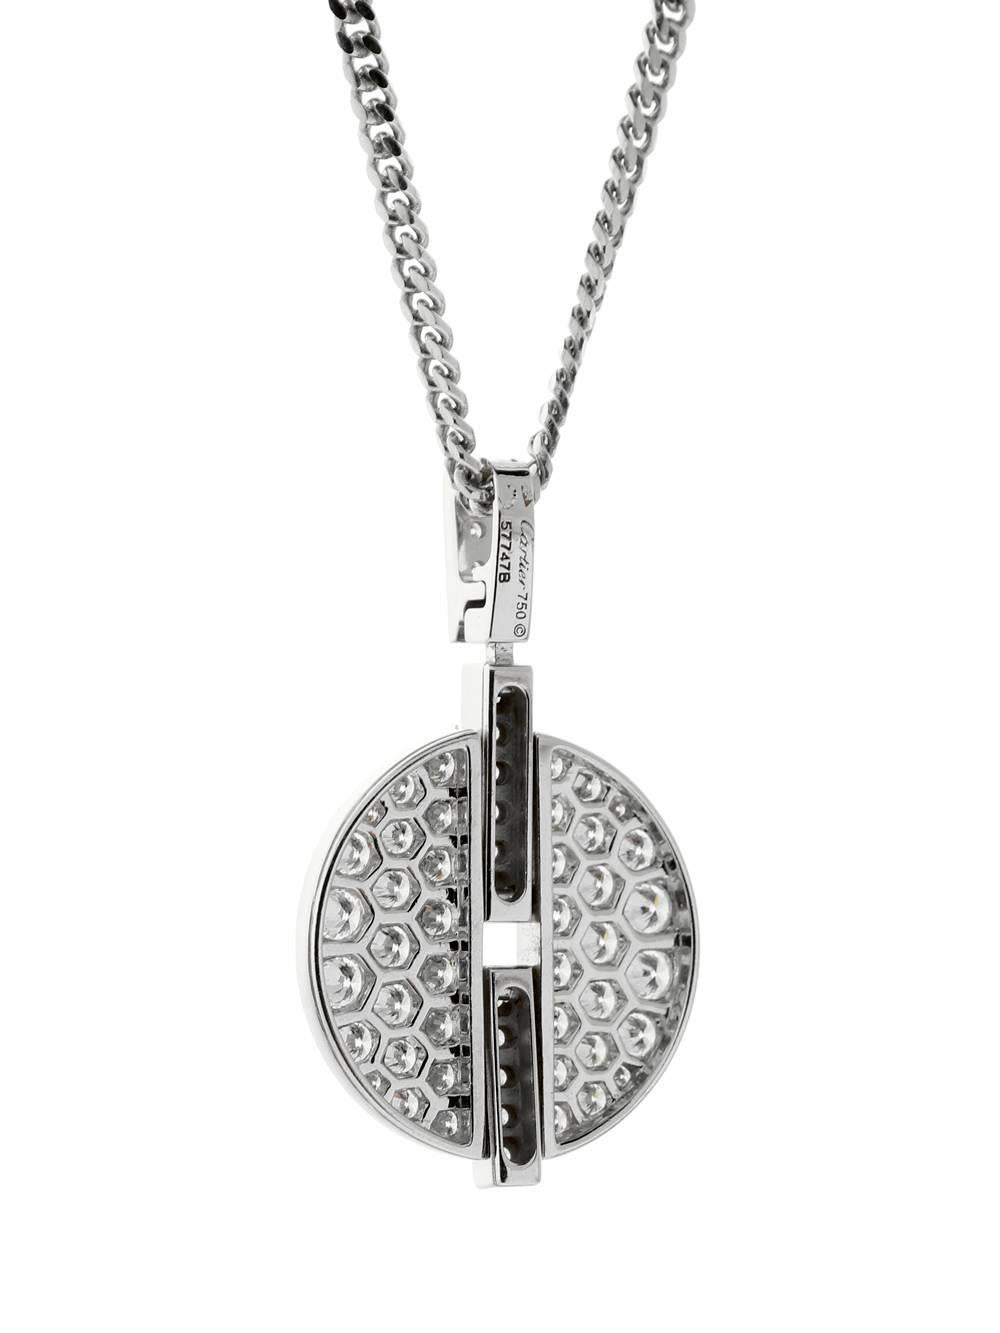 A beautiful 18kt white gold Cartier diamond pendant boasting the finest diamonds in a circular pattern.

Dimensions: The pendant measures .78″ Inches wide by 1.25″ Inches in length

Inventory ID: 0000108